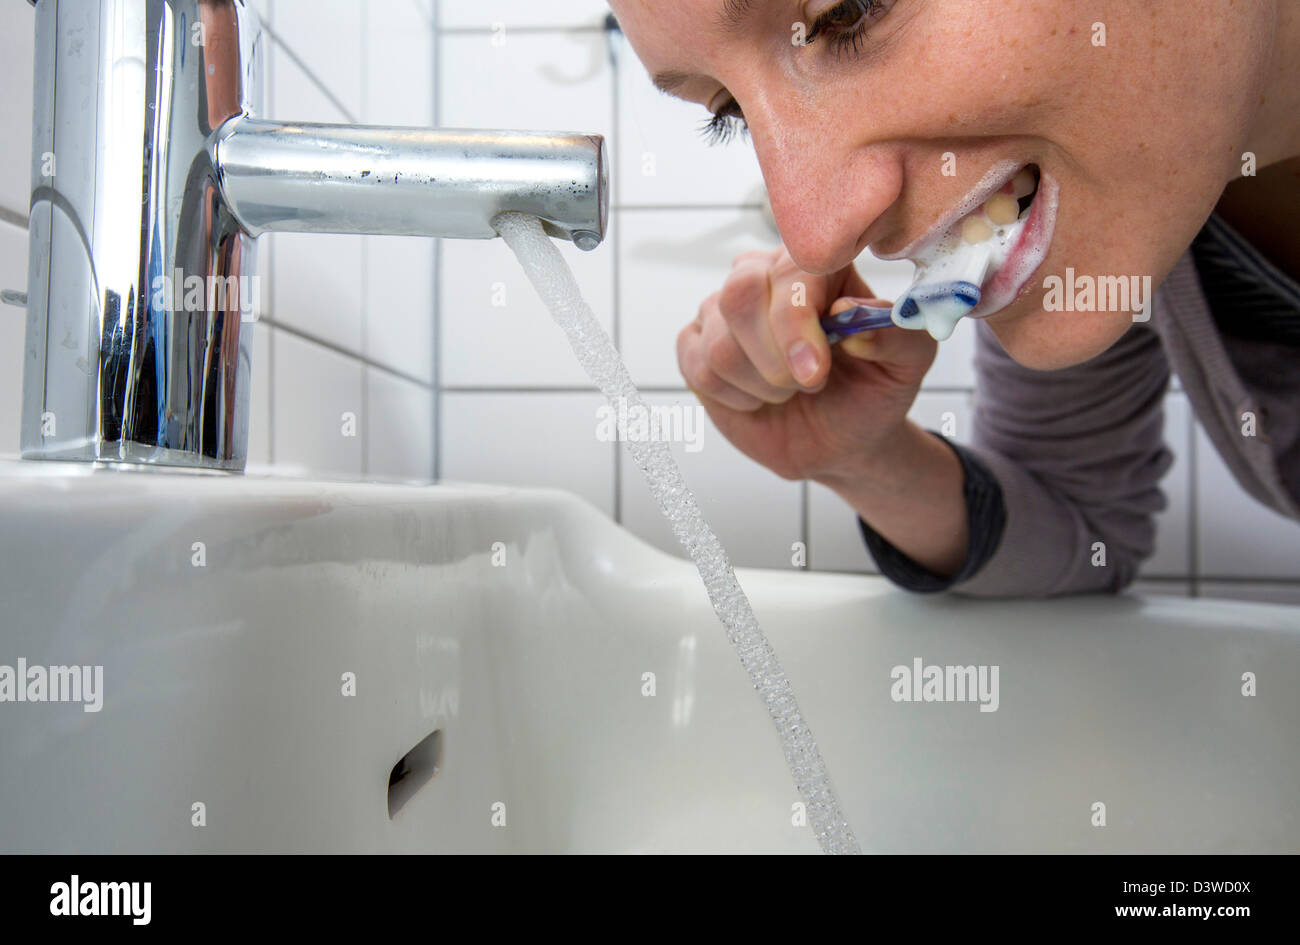 Woman is brushing her teeth, while water is still running from the tap. Symbol image for water wastage. Stock Photo